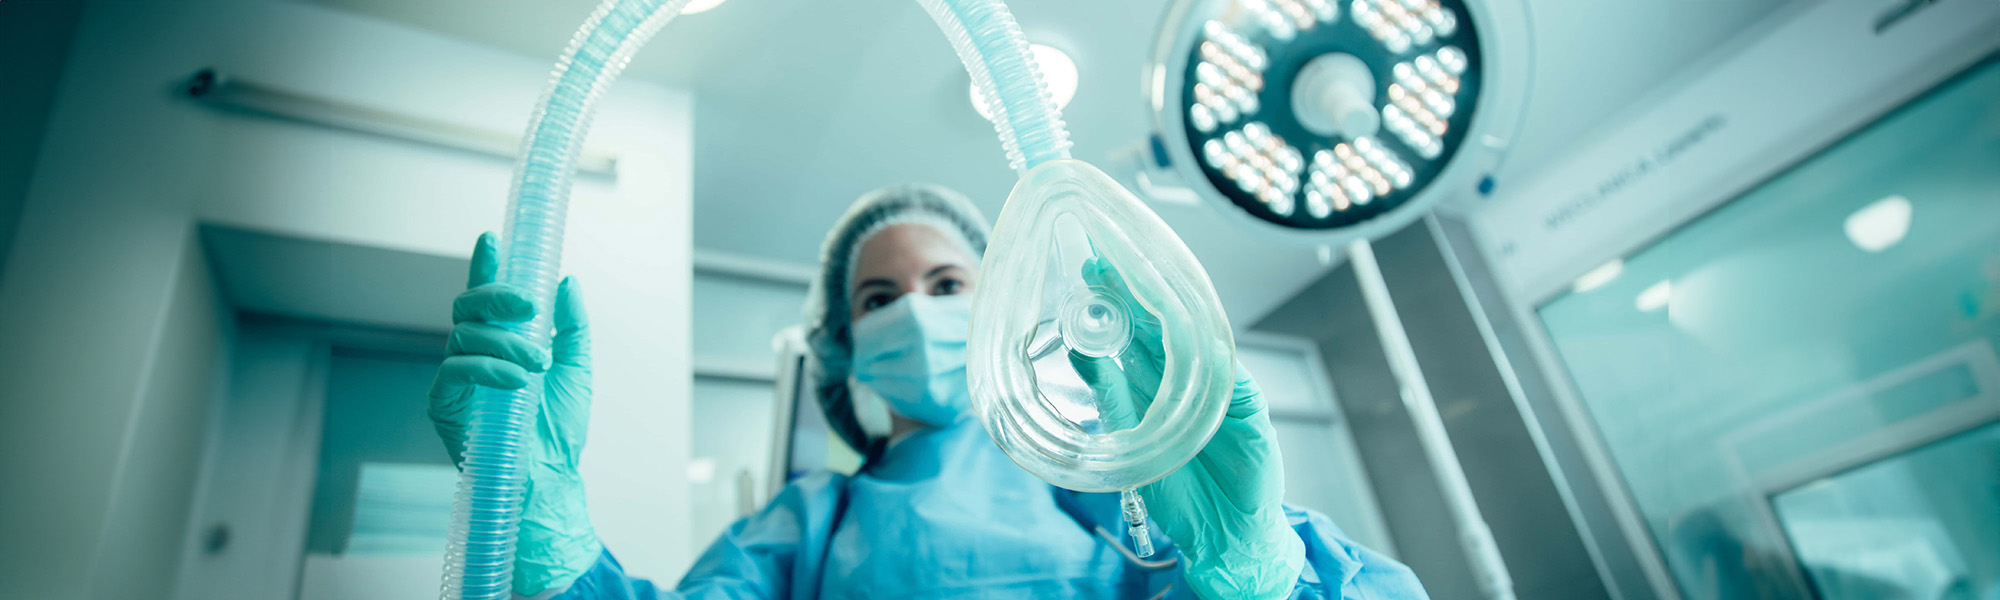 anesthesia mask in hands of medical worker in clinic